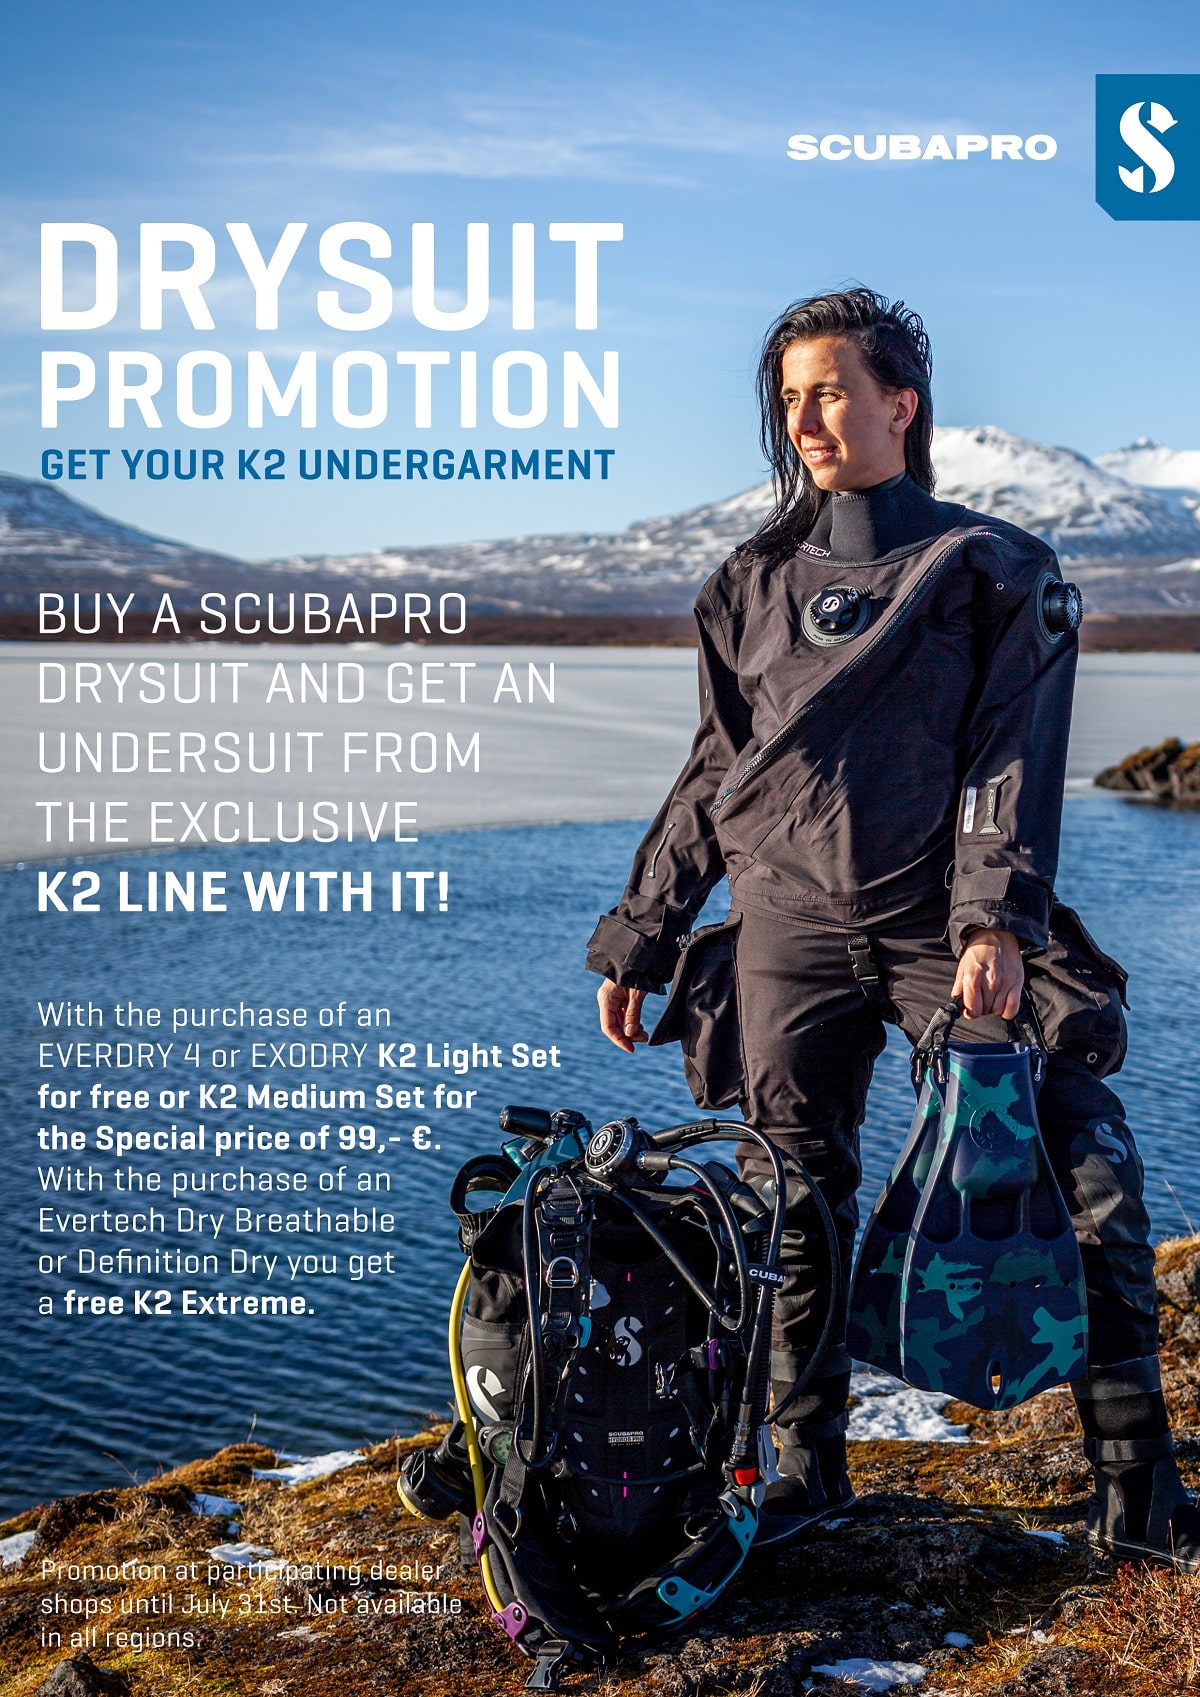 Buy a Scubapro drysuit and get an undersuit from the K2 line!